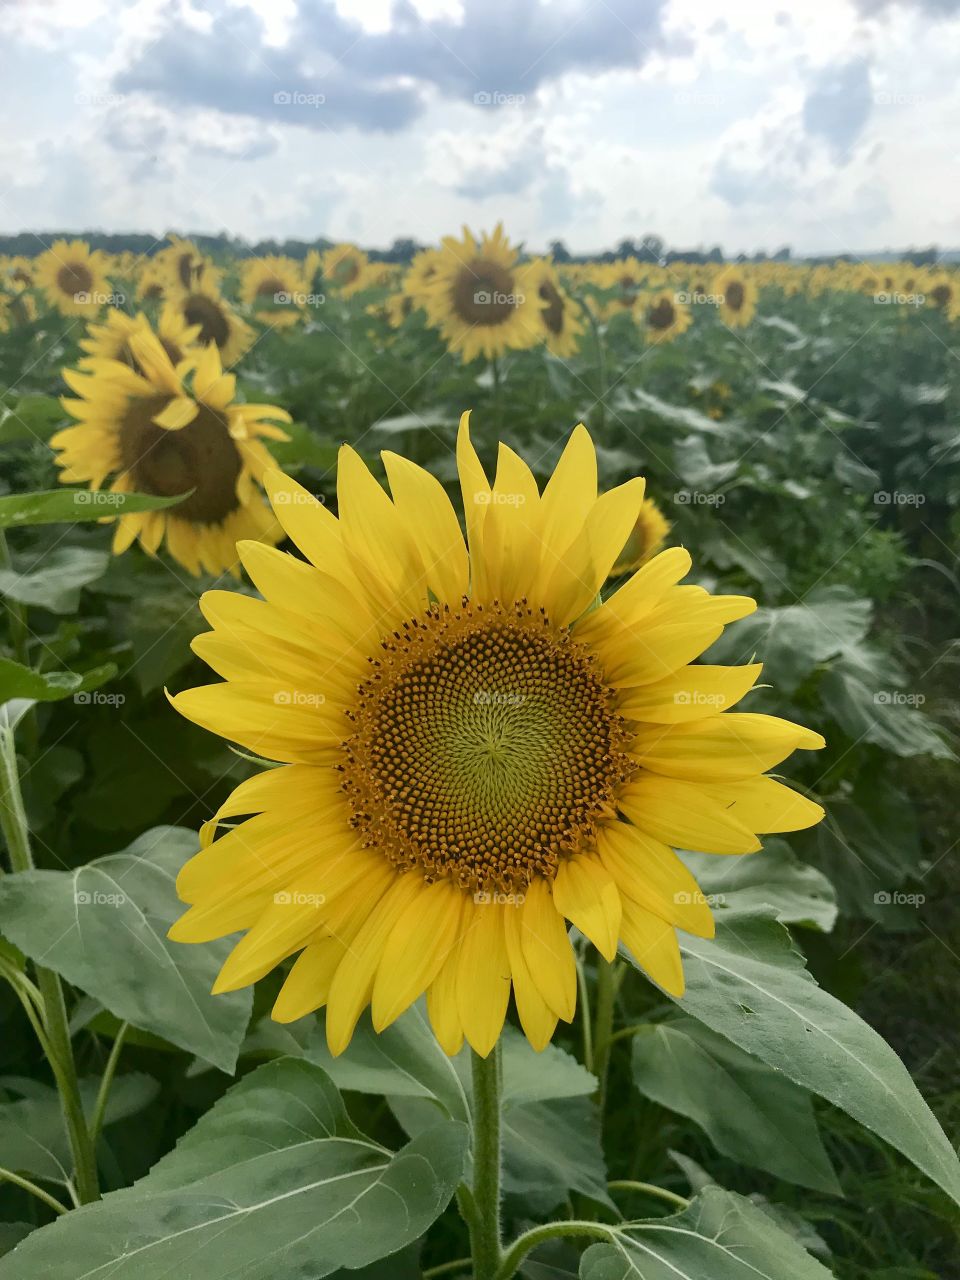 Sunflowers stand tall